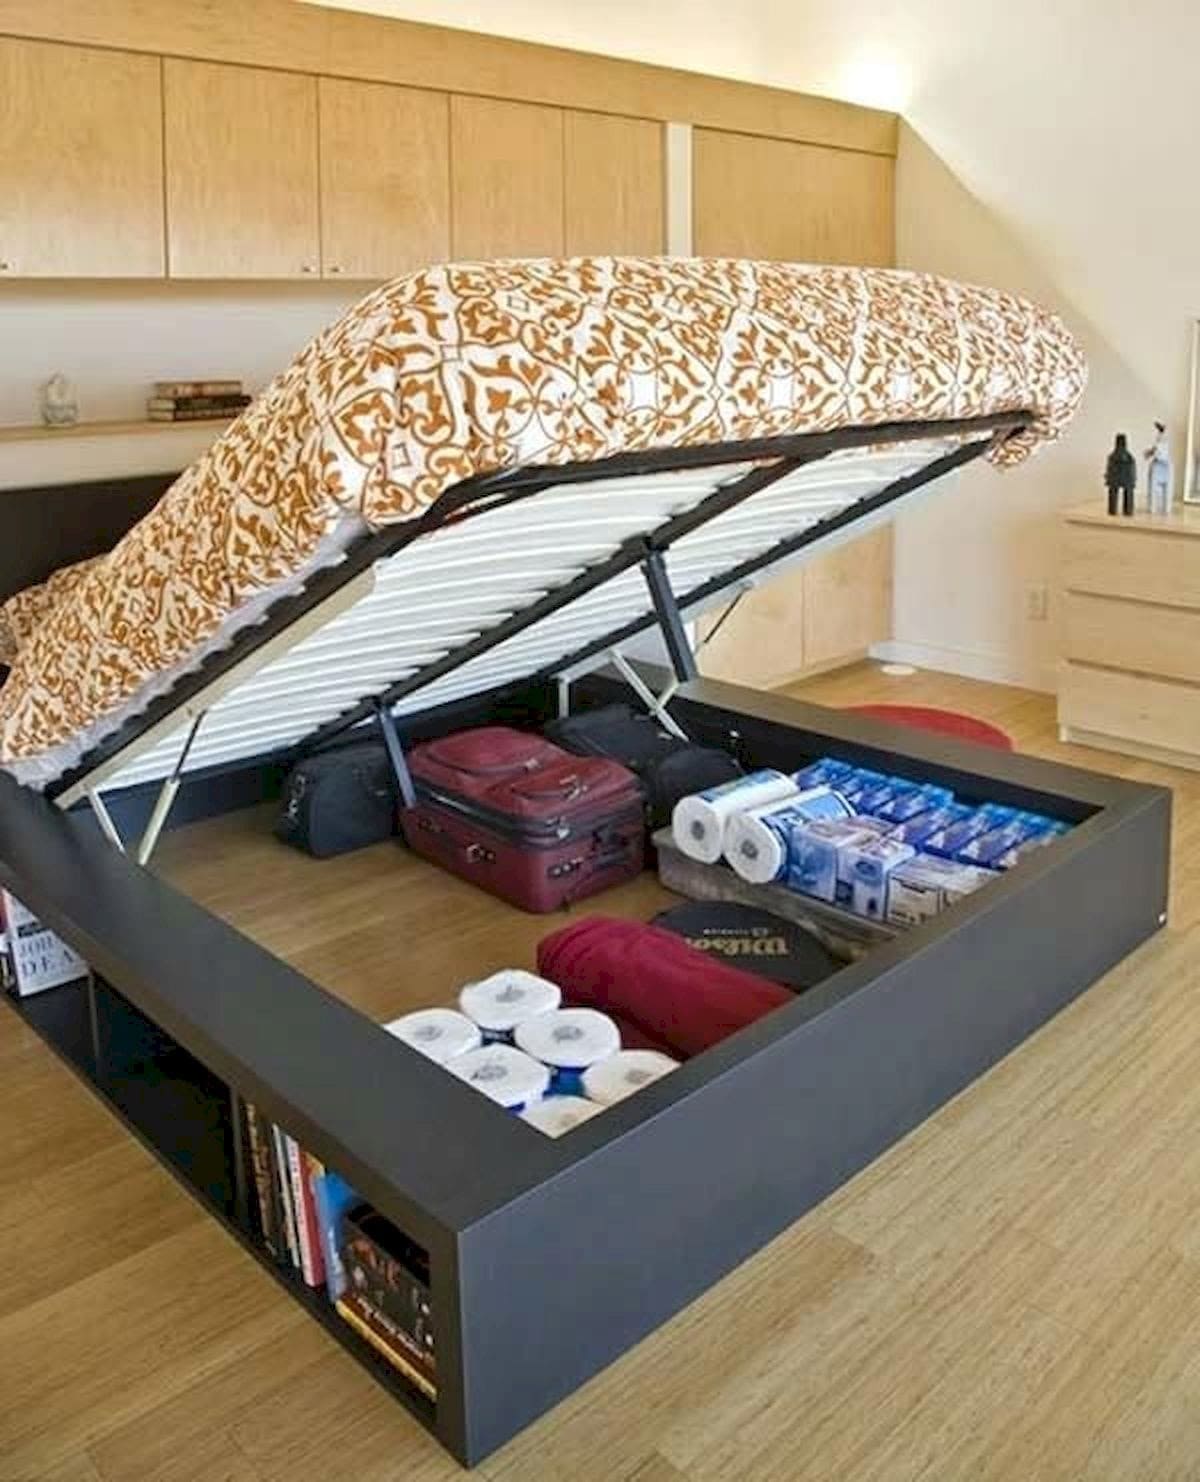 23 creative storage bed ideas to add to your bag - 175